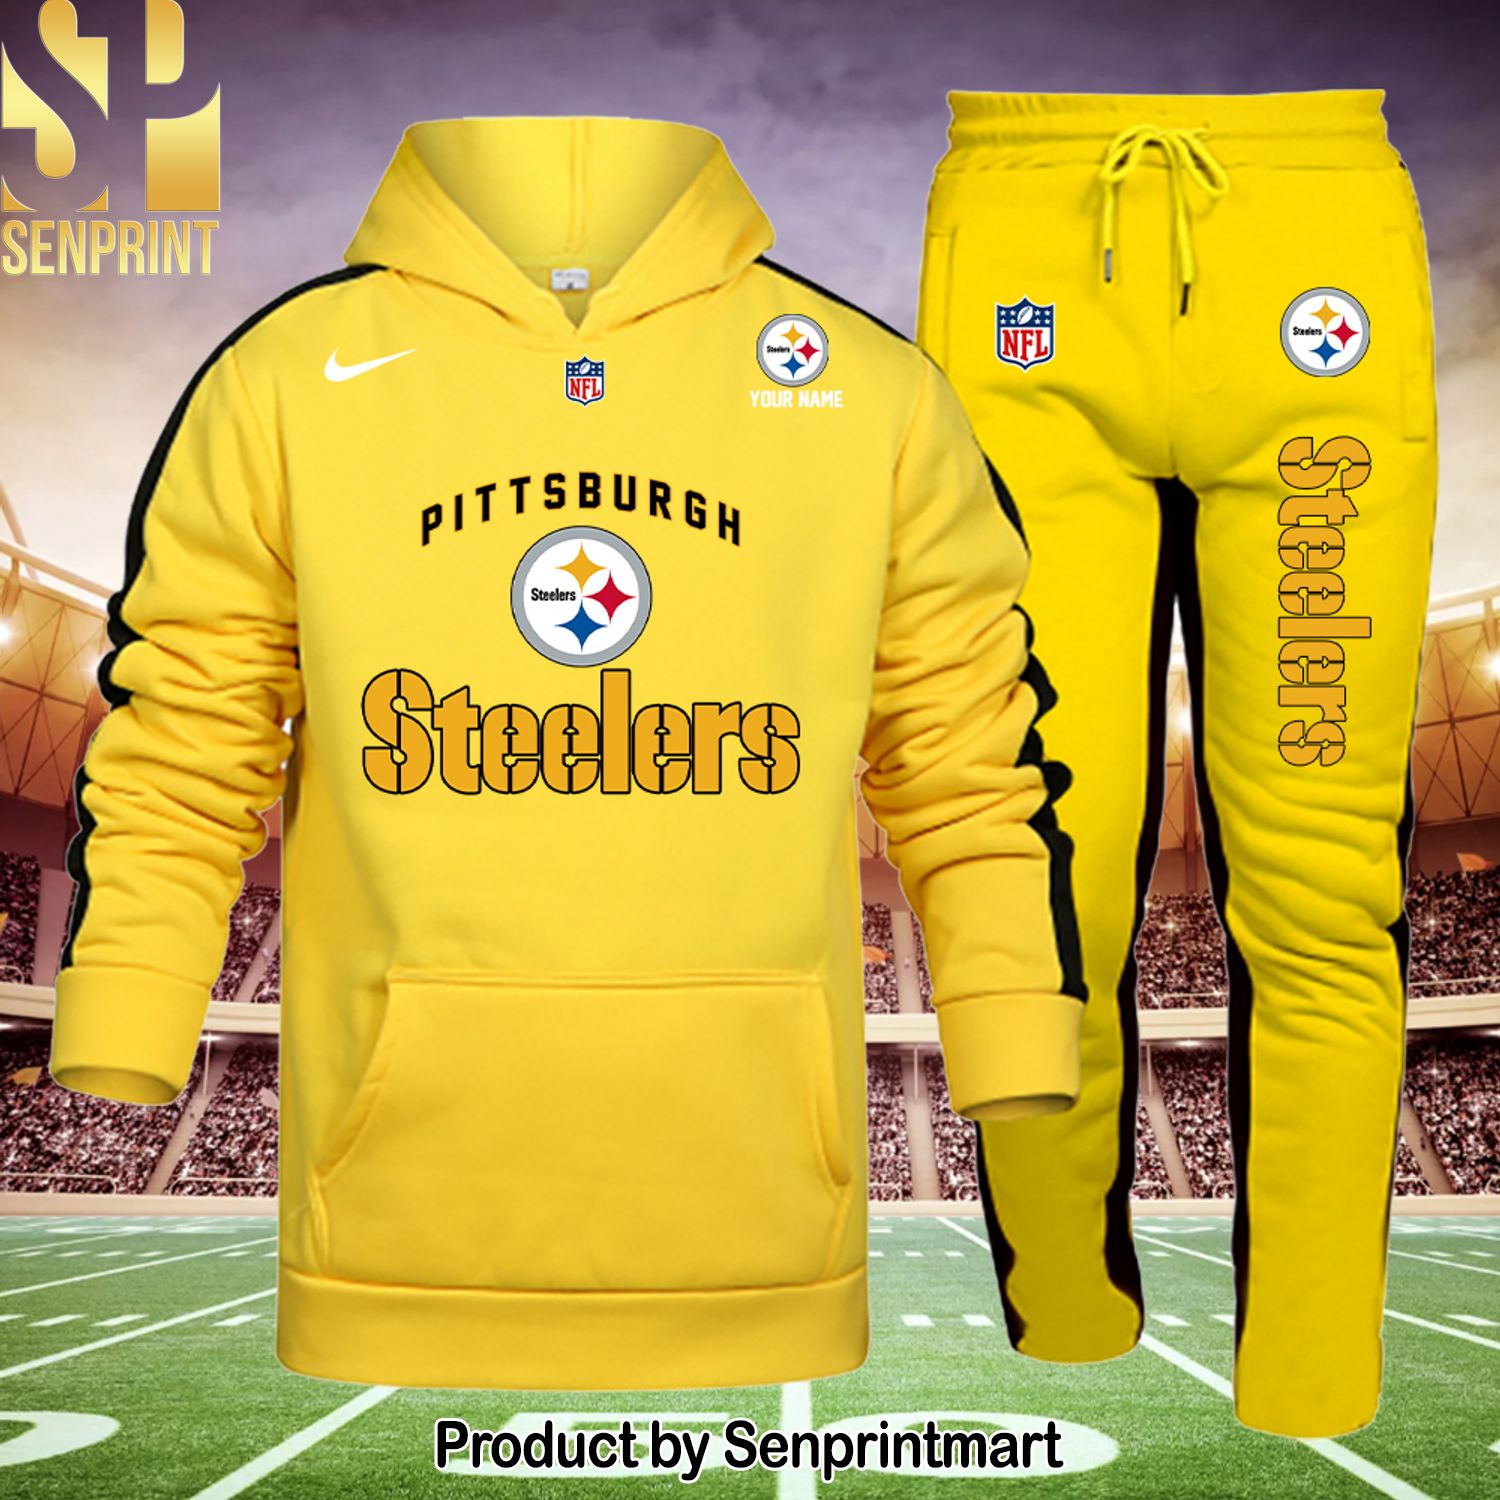 Pittsburgh Steelers New Style Shirt and Pants